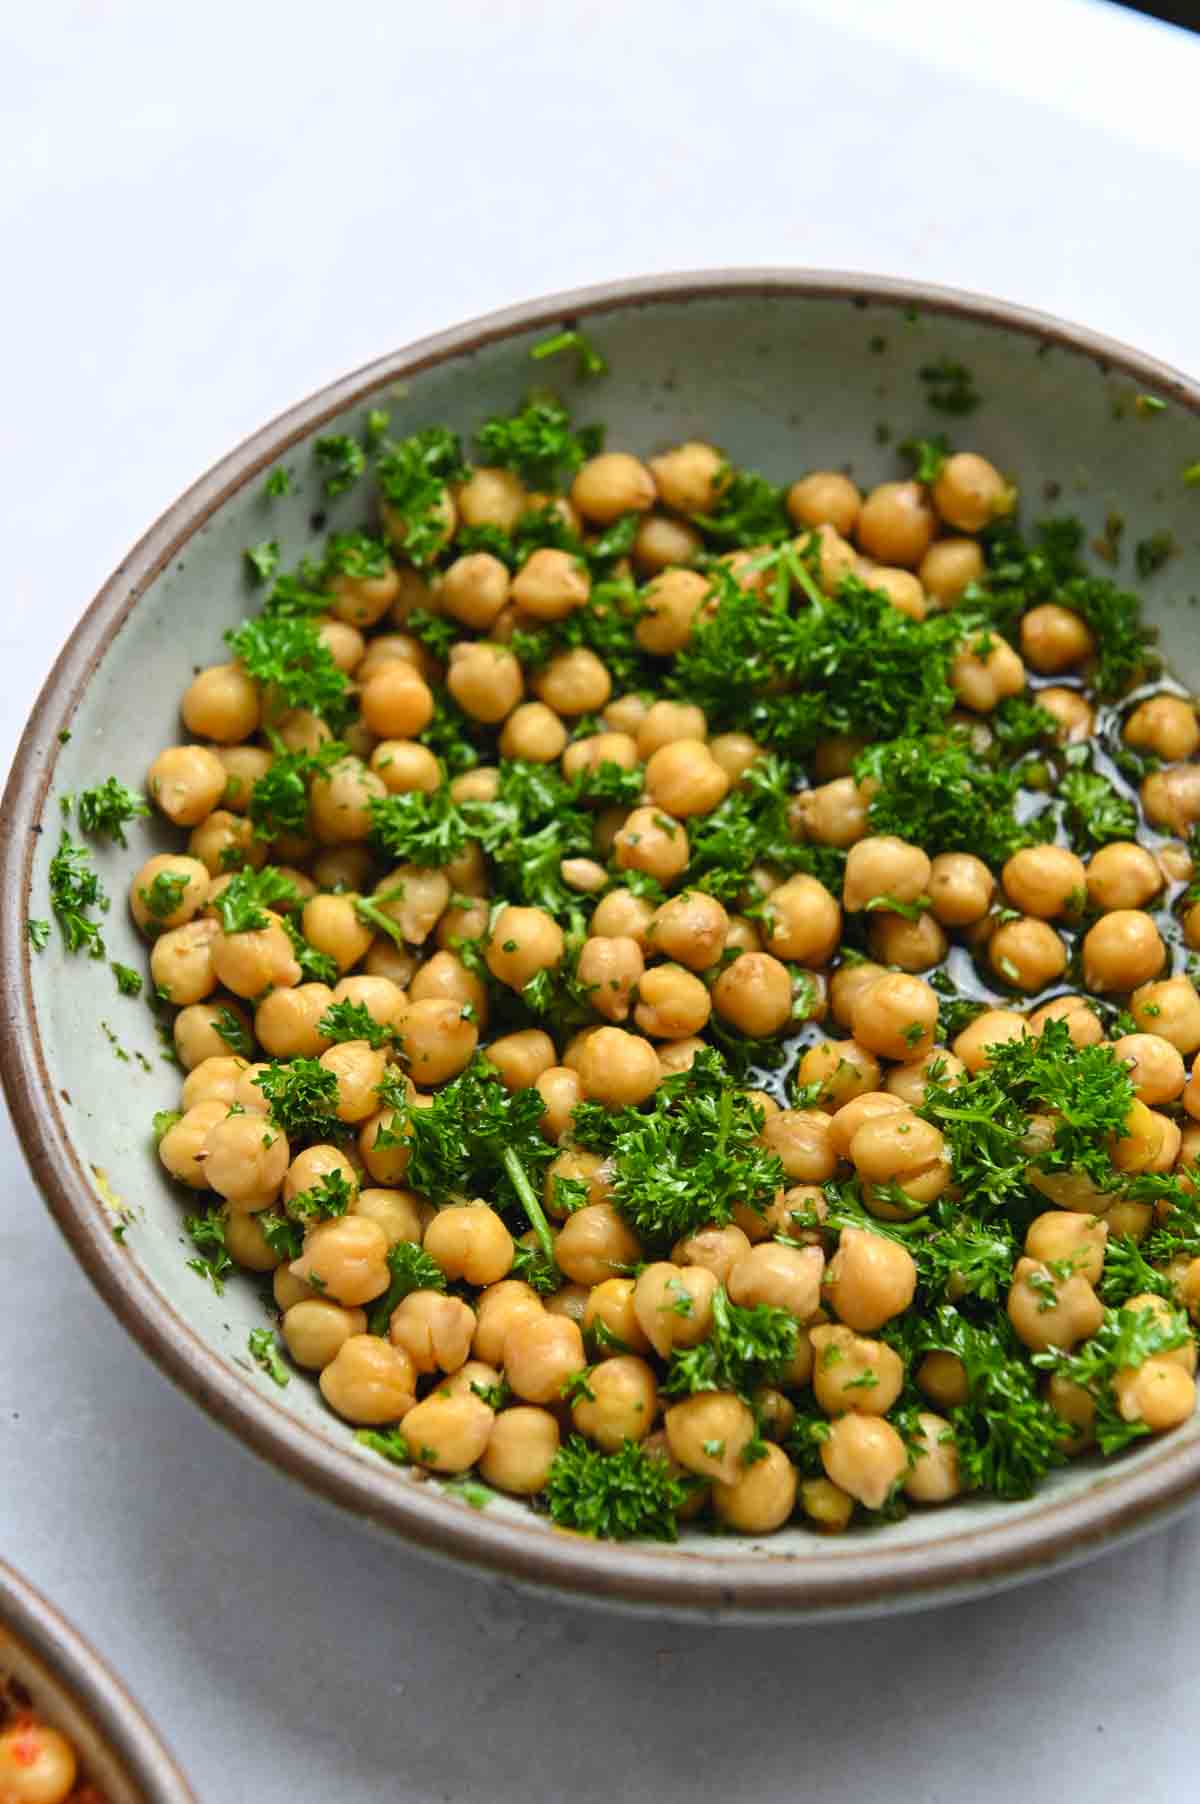 Close up of chickpeas and parsley in a gray bowl.